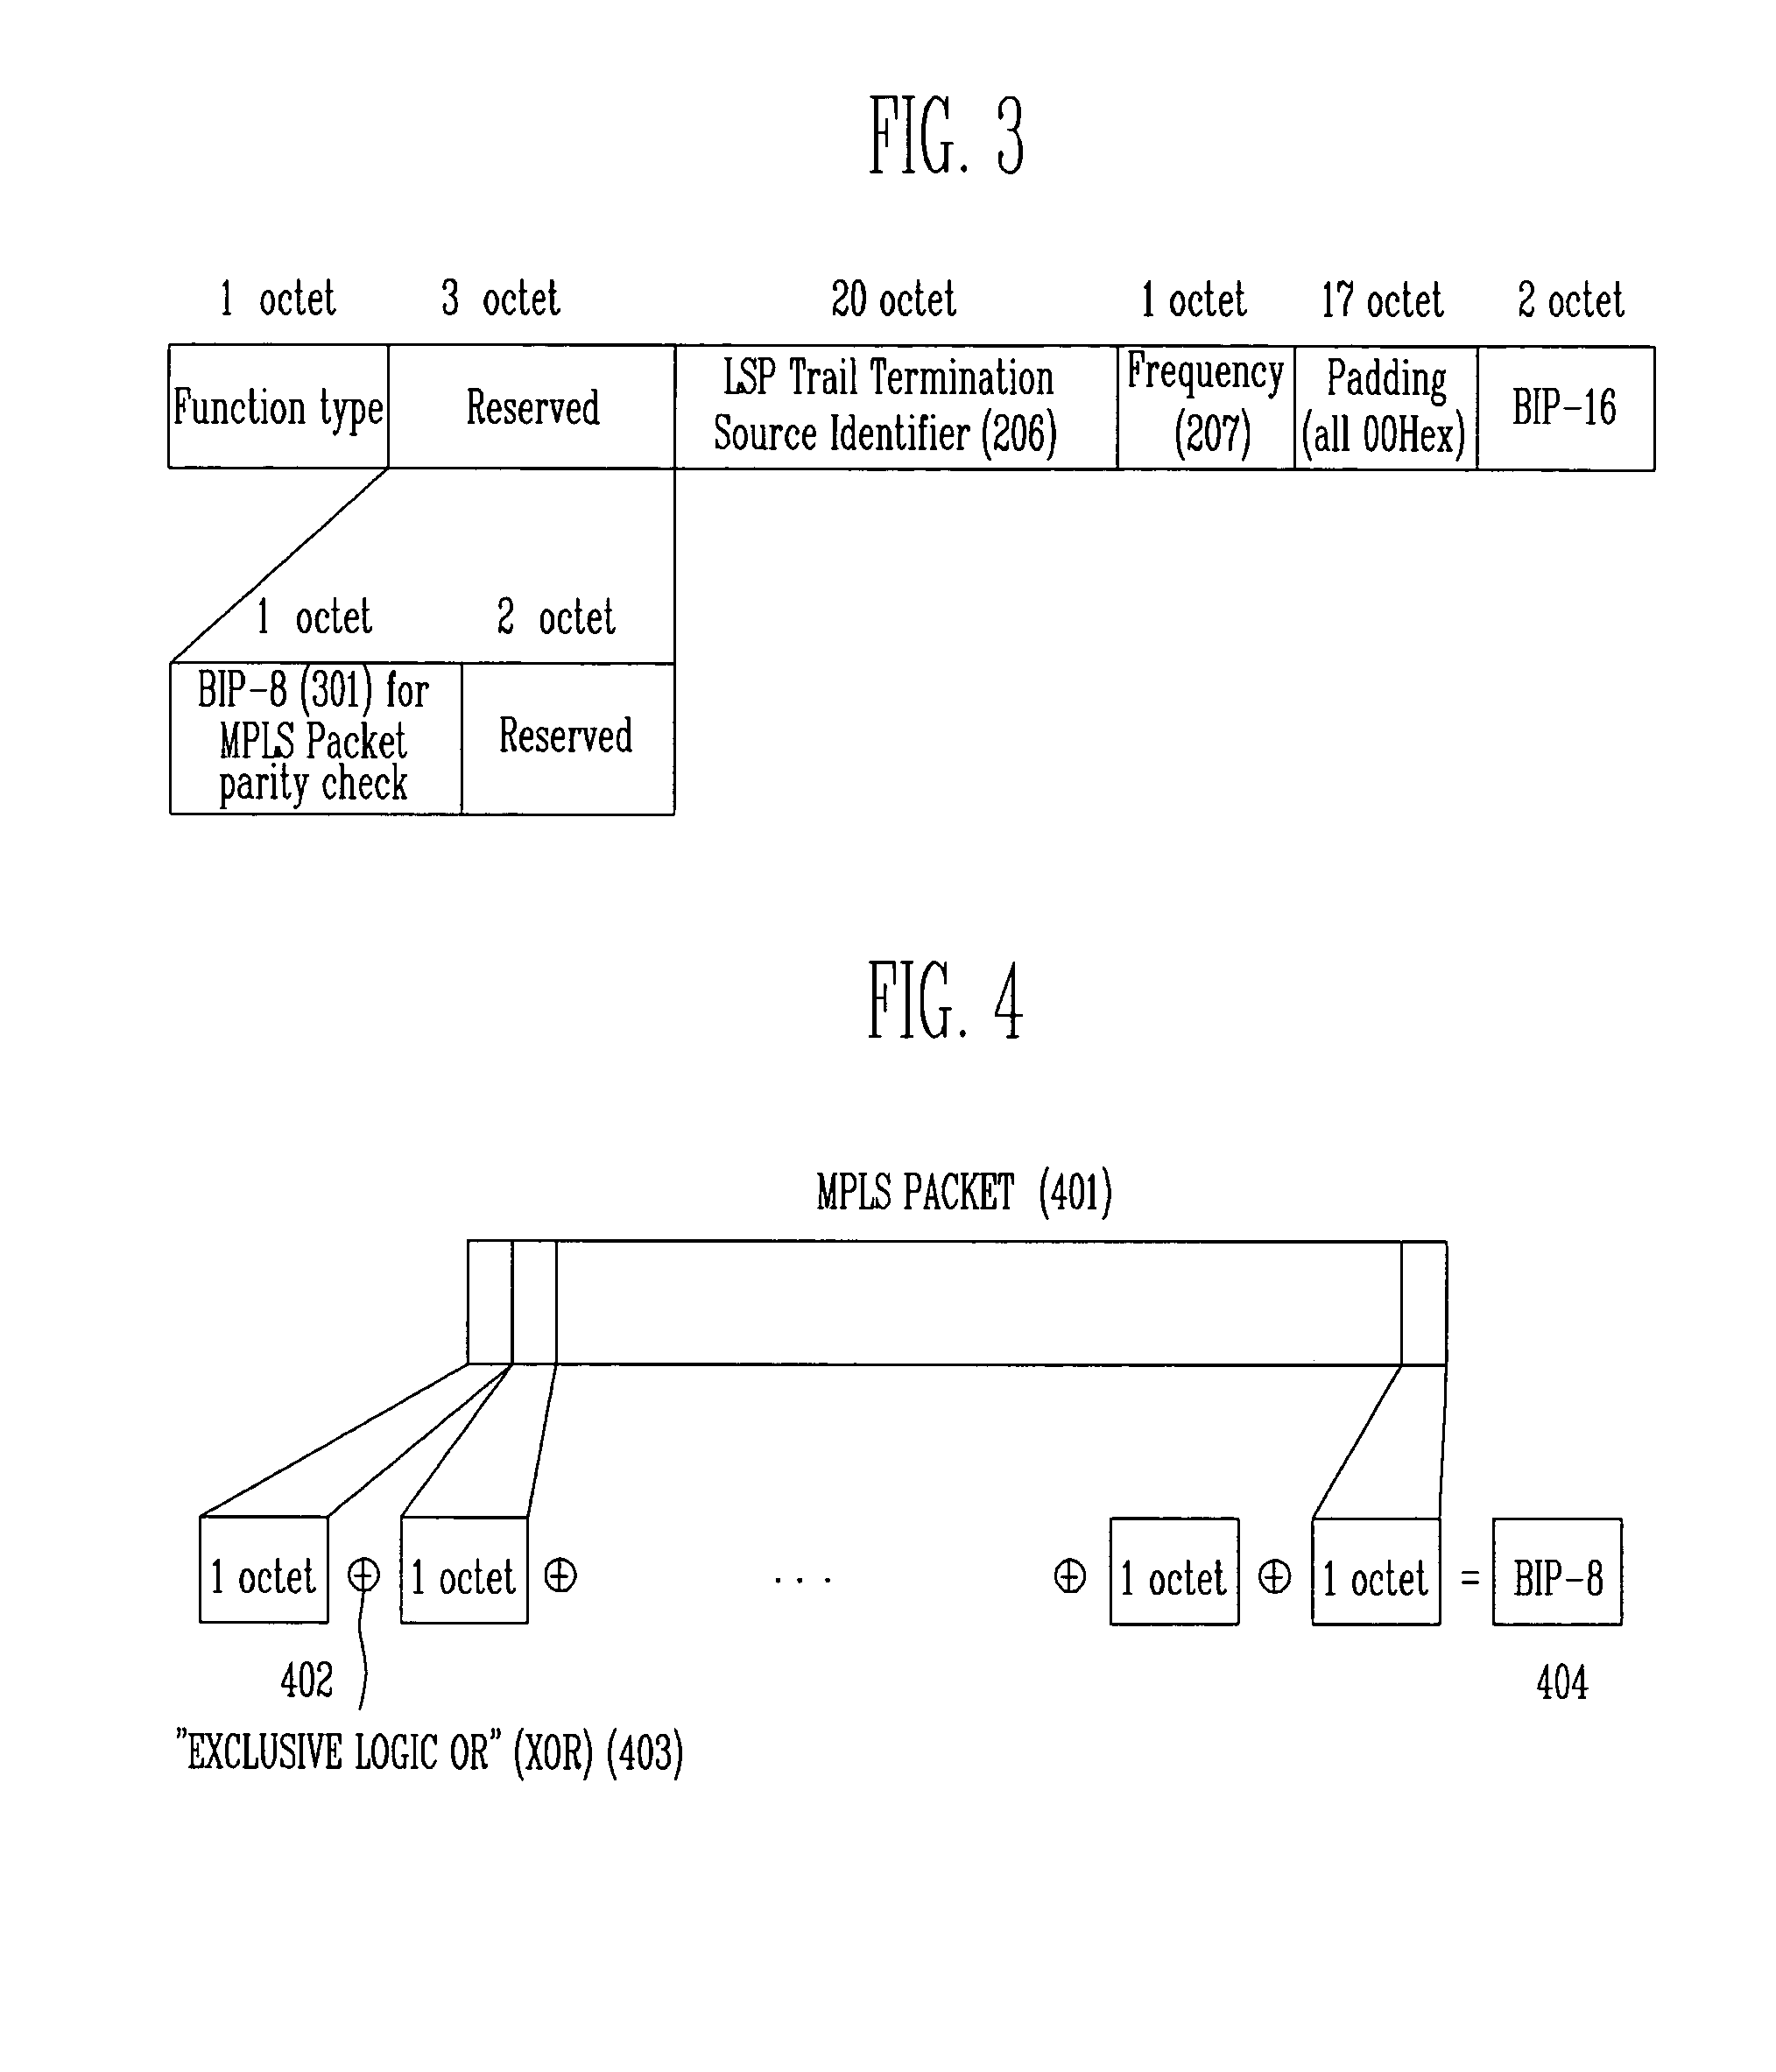 Method for measuring performance of MPLS LSP